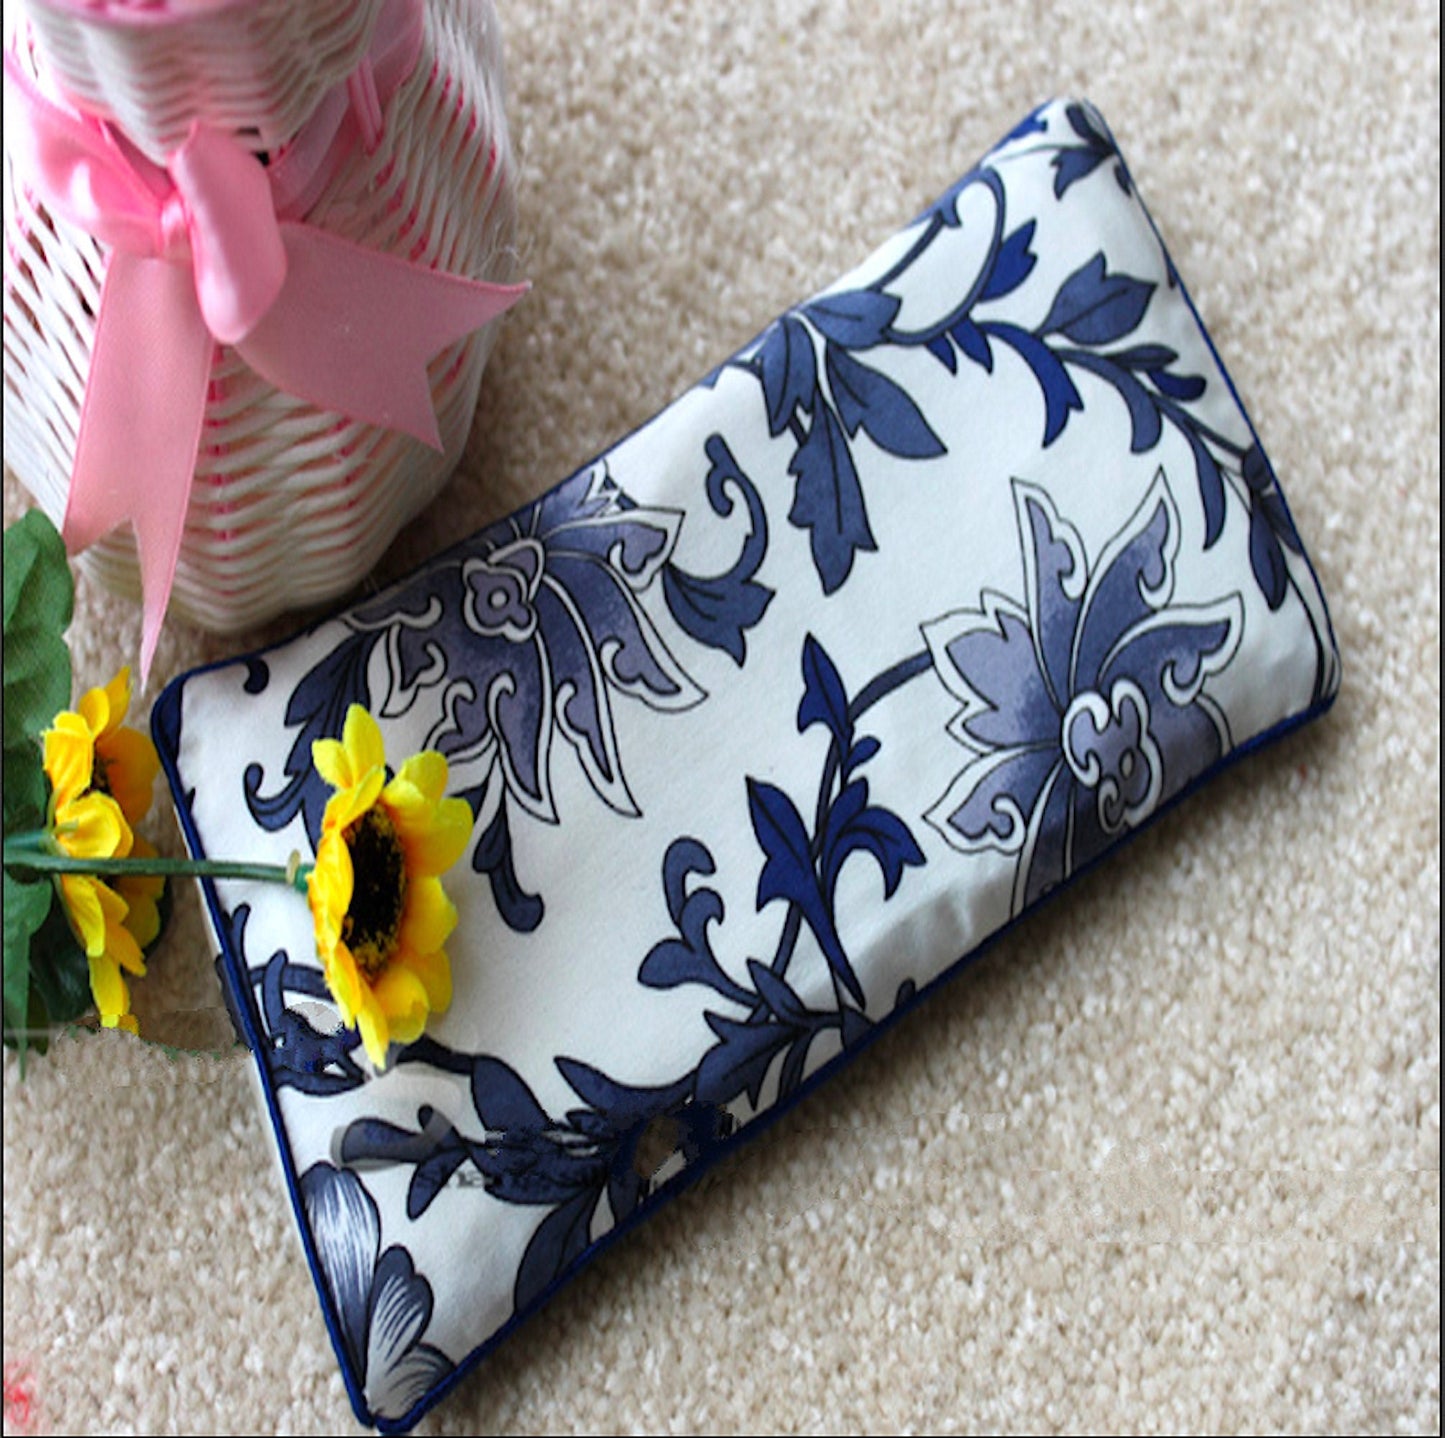 Eye Pillow With Lavender Flax Seed Filling For Soothing Eye 100% Silk Home 19.99 Indigo Paisley